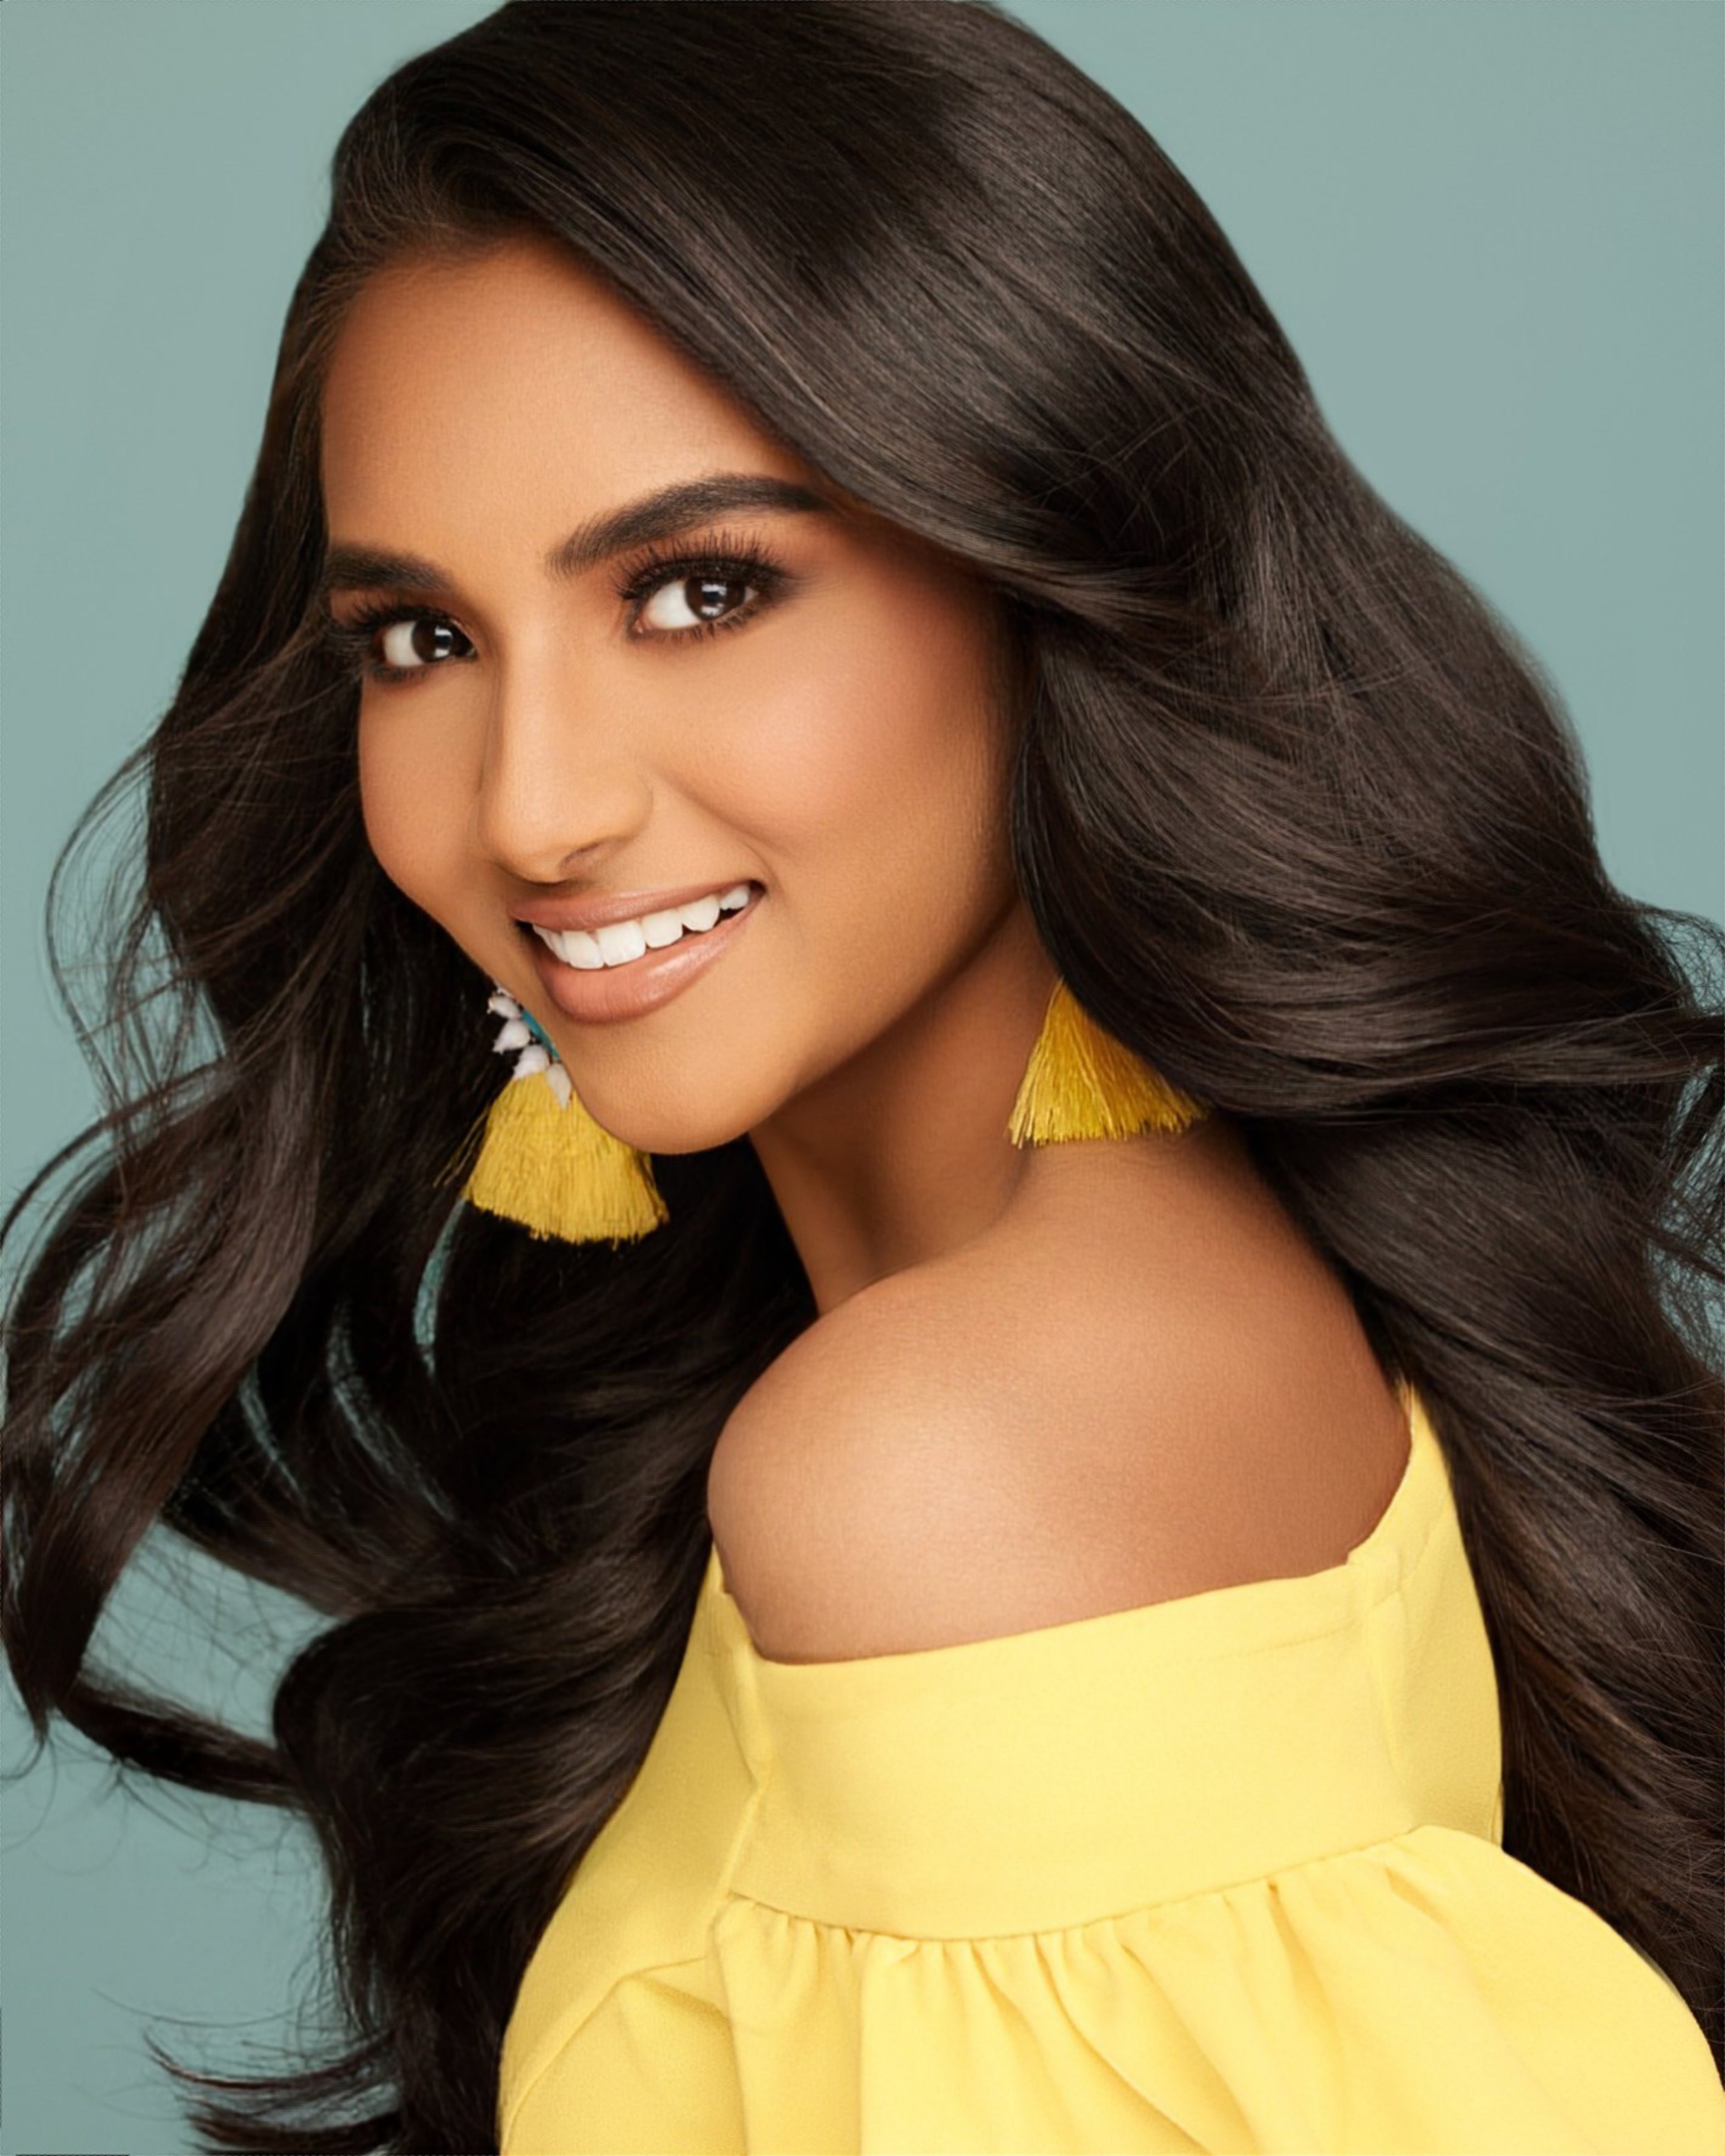 Newly Crowned Miss Wisconsin Teen USA 2022, Sage